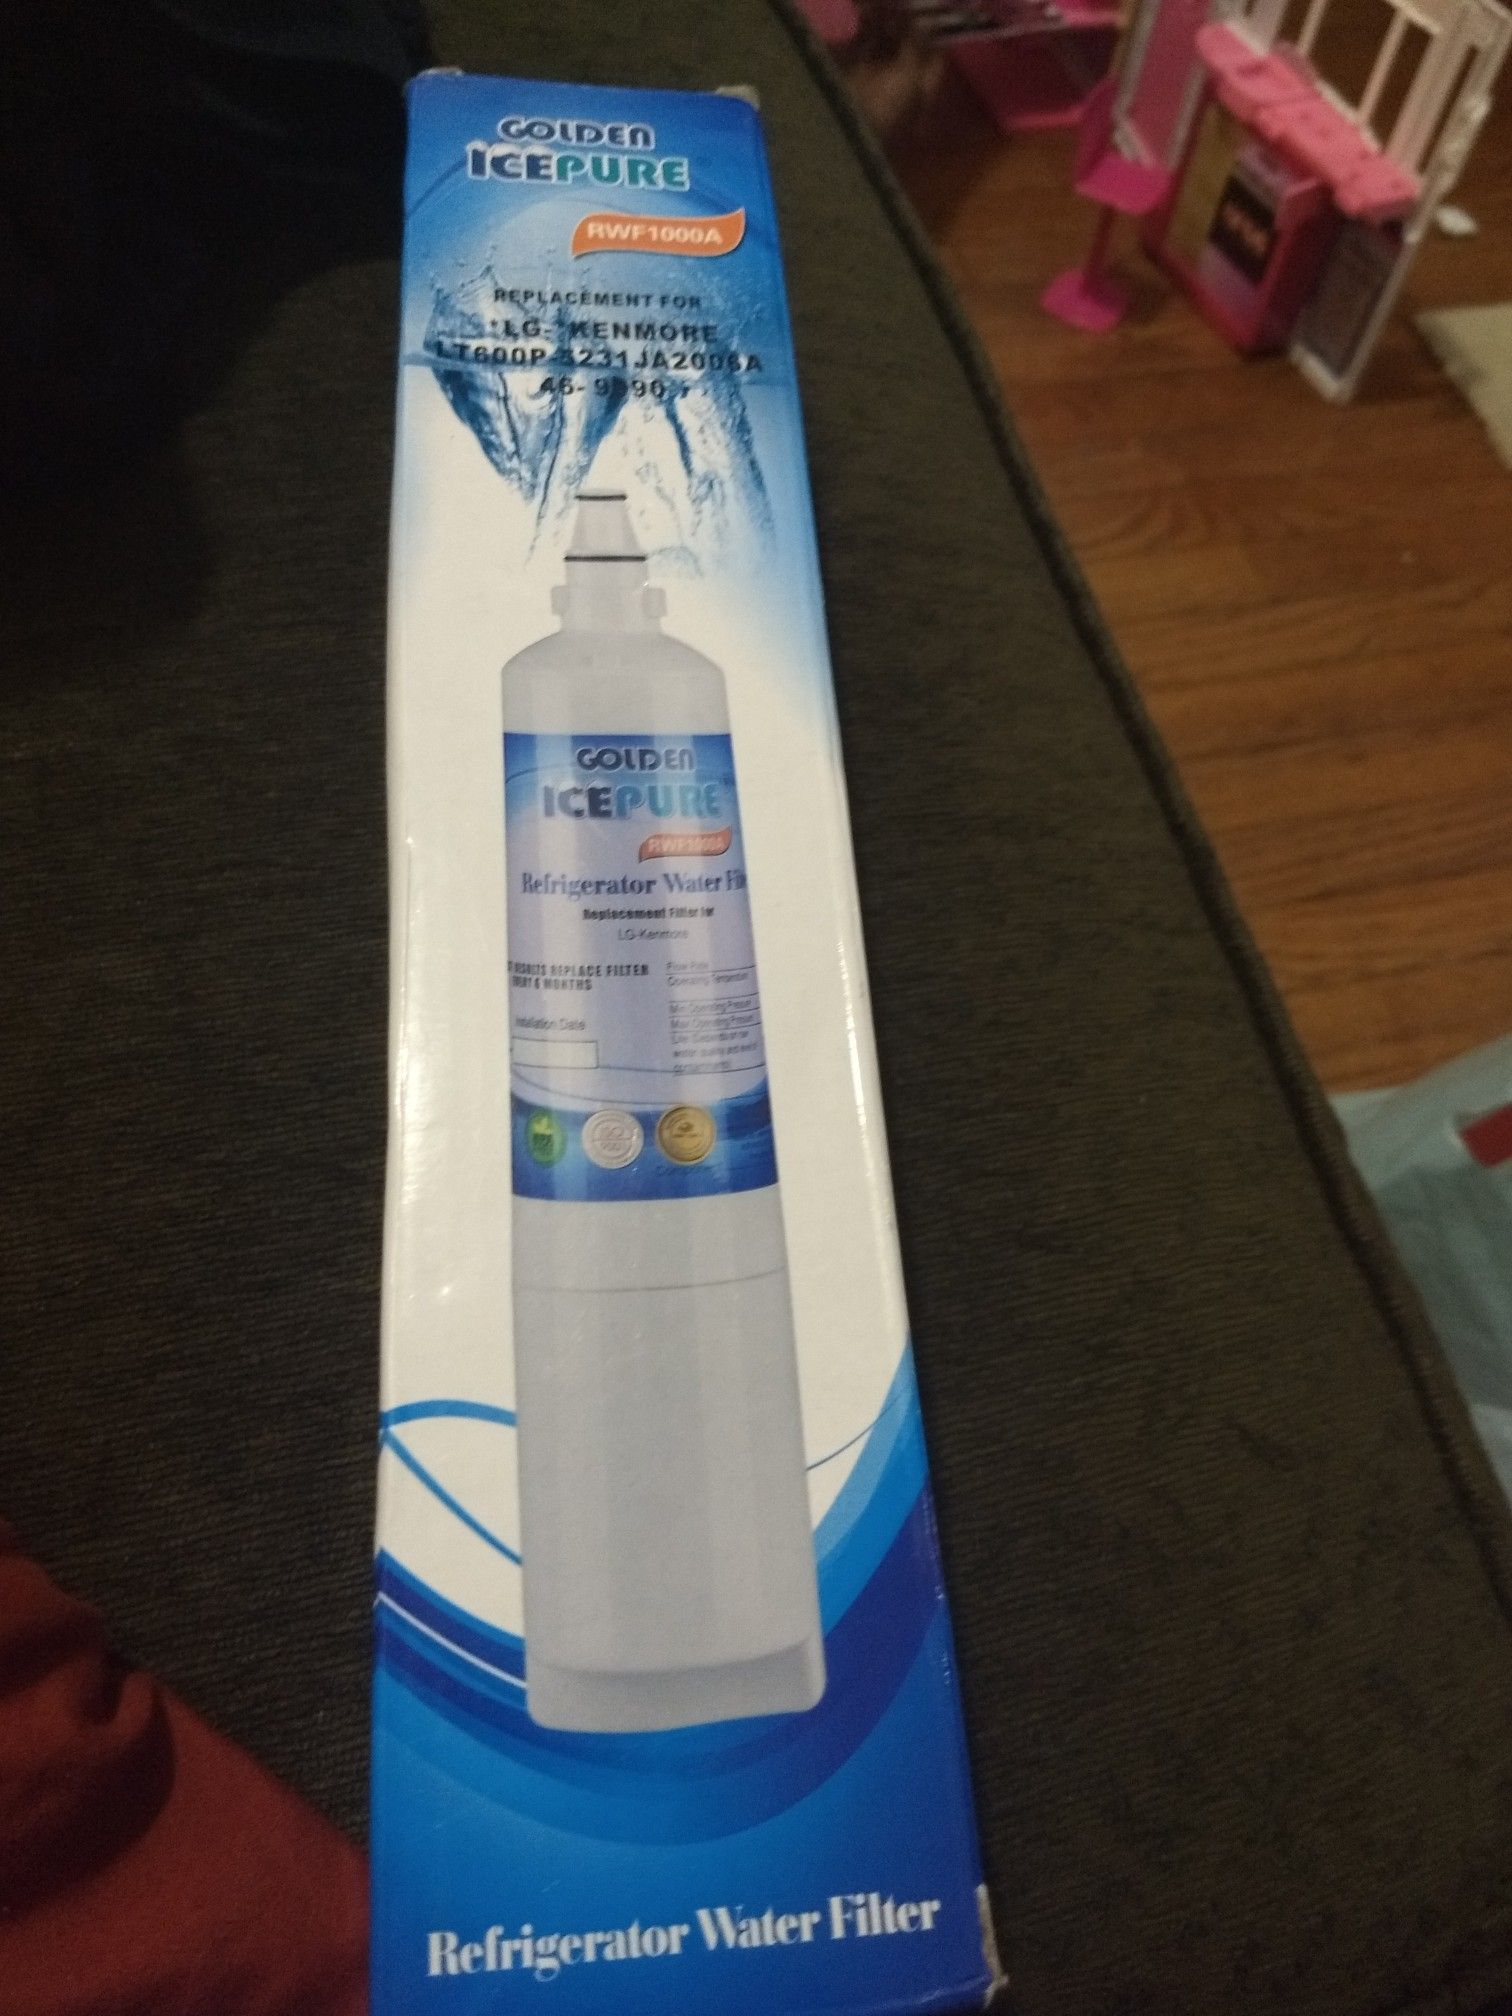 ICEPURE LT600P Replacement for Refrigerator Water Filter, Compatible LG LT600P, . Condition is New. Shipped with USPS Priority Mail.